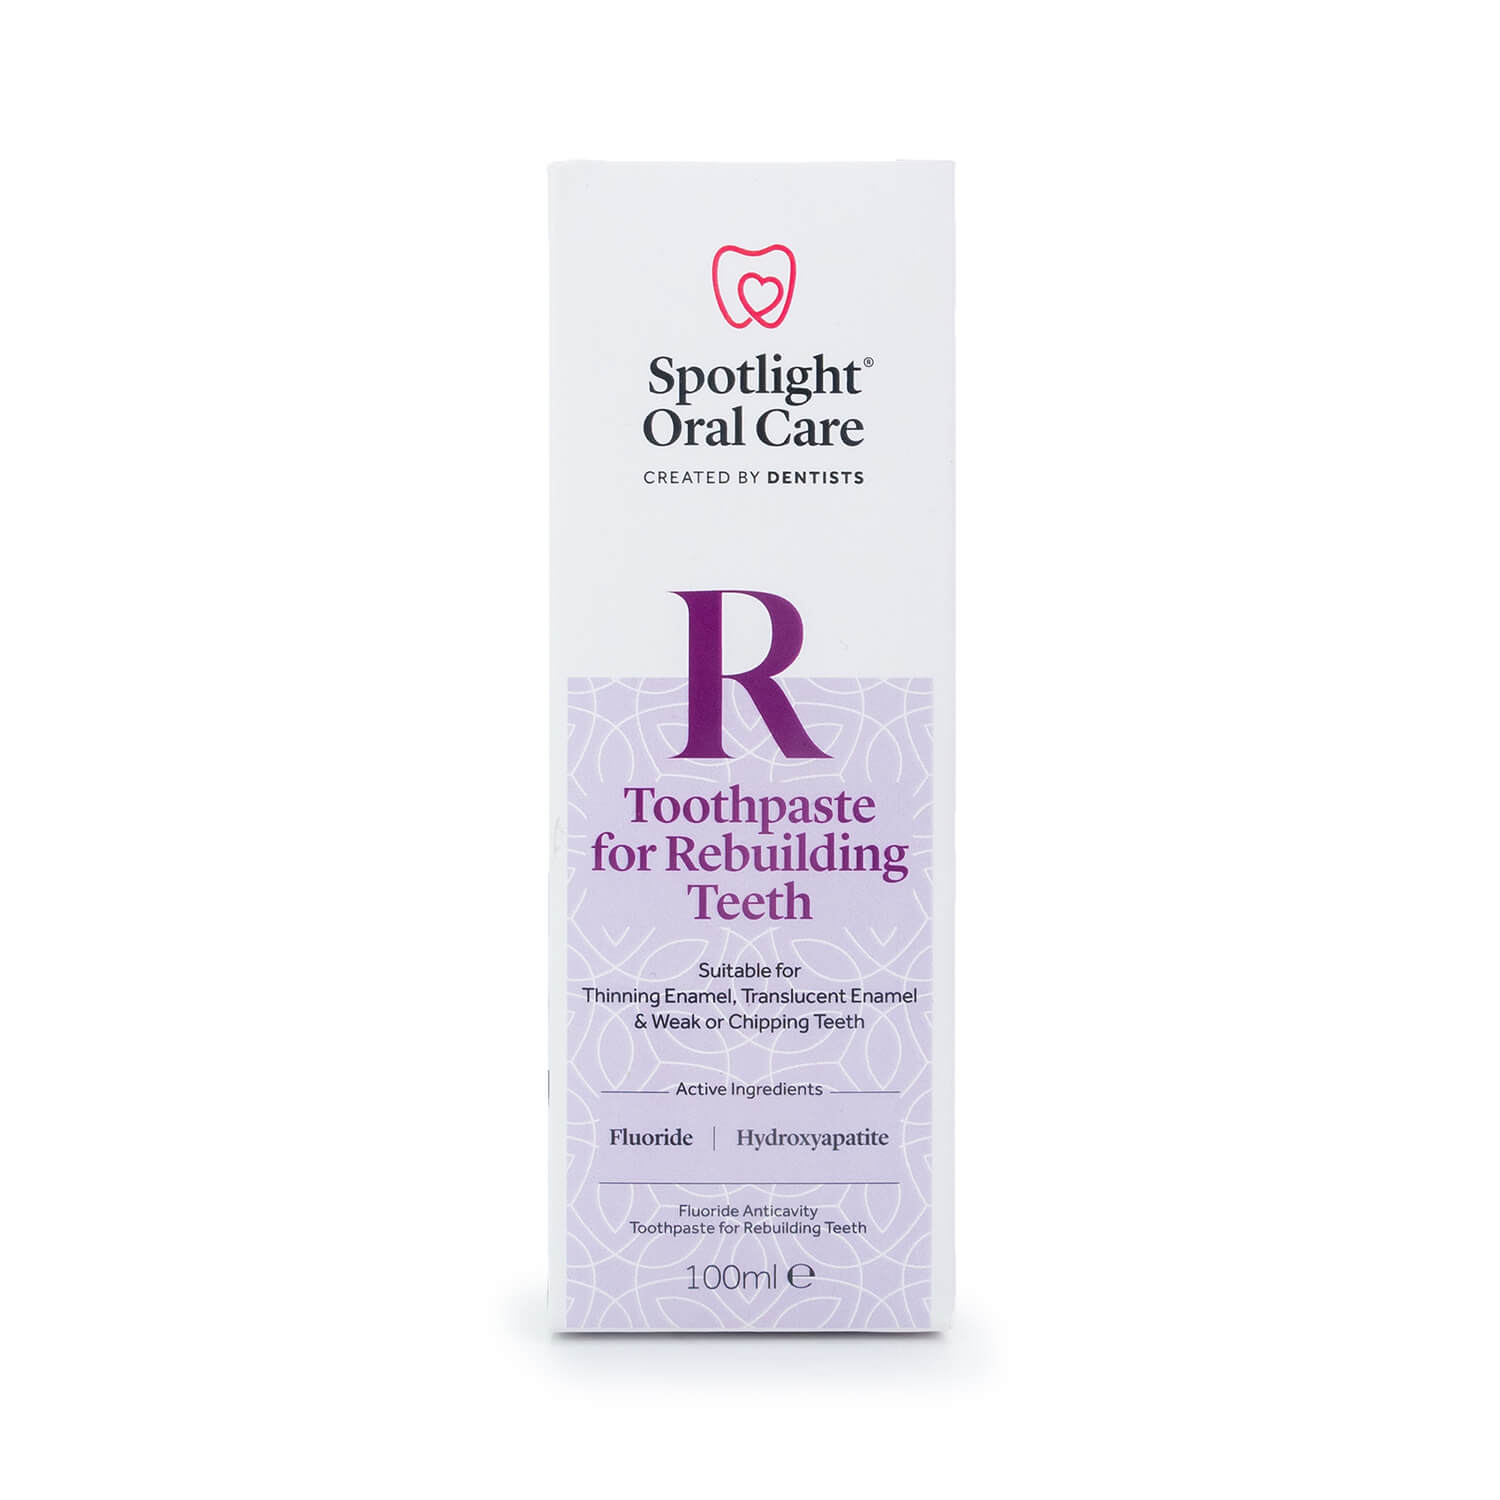 Spotlight Oral Care Toothpaste for Rebuilding Teeth 1 Shaws Department Stores